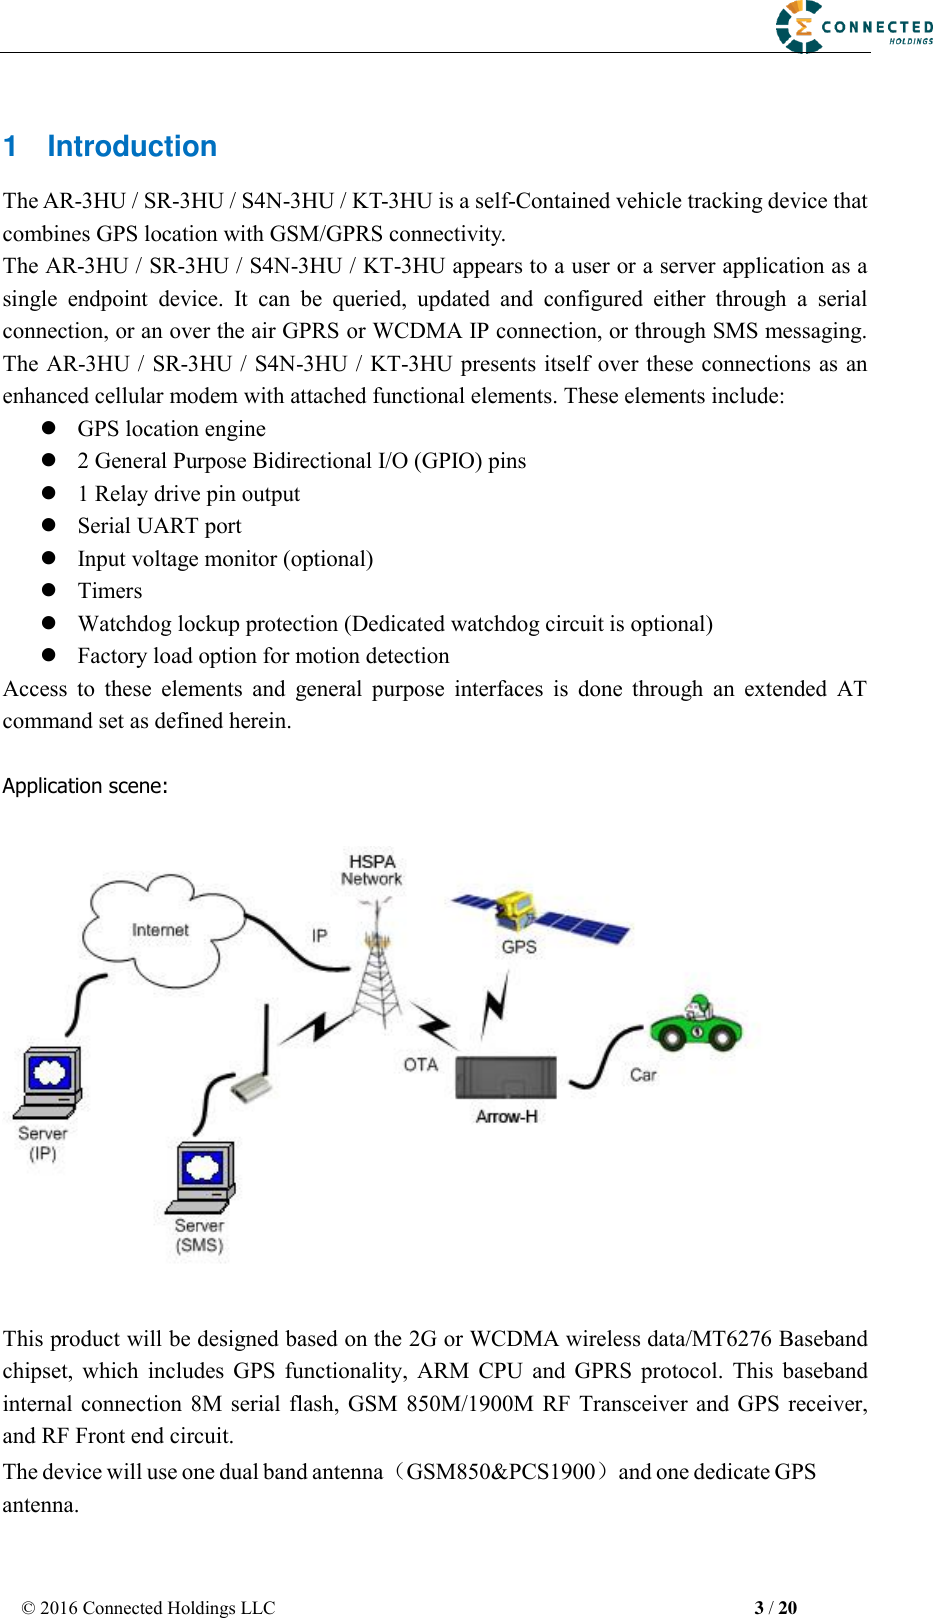 © 2016 Connected Holdings LLC  3 / 20 1  Introduction The AR-3HU / SR-3HU / S4N-3HU / KT-3HU is a self-Contained vehicle tracking device that combines GPS location with GSM/GPRS connectivity. The AR-3HU / SR-3HU / S4N-3HU / KT-3HU appears to a user or a server application as a single  endpoint  device.  It  can  be  queried,  updated  and  configured  either  through  a  serial connection, or an over the air GPRS or WCDMA IP connection, or through SMS messaging. The AR-3HU / SR-3HU / S4N-3HU / KT-3HU presents itself over these connections as an enhanced cellular modem with attached functional elements. These elements include:   GPS location engine2 General Purpose Bidirectional I/O (GPIO) pins1 Relay drive pin outputSerial UART portInput voltage monitor (optional)TimersWatchdog lockup protection (Dedicated watchdog circuit is optional)Factory load option for motion detectionAccess  to  these  elements  and  general  purpose  interfaces  is  done  through  an  extended  AT command set as defined herein. Application scene: This product will be designed based on the 2G or WCDMA wireless data/MT6276 Baseband chipset,  which  includes  GPS  functionality,  ARM  CPU  and  GPRS  protocol.  This  baseband internal  connection  8M  serial  flash, GSM  850M/1900M RF  Transceiver and  GPS receiver, and RF Front end circuit. The device will use one dual band antenna（GSM850&amp;PCS1900）and one dedicate GPS antenna. 